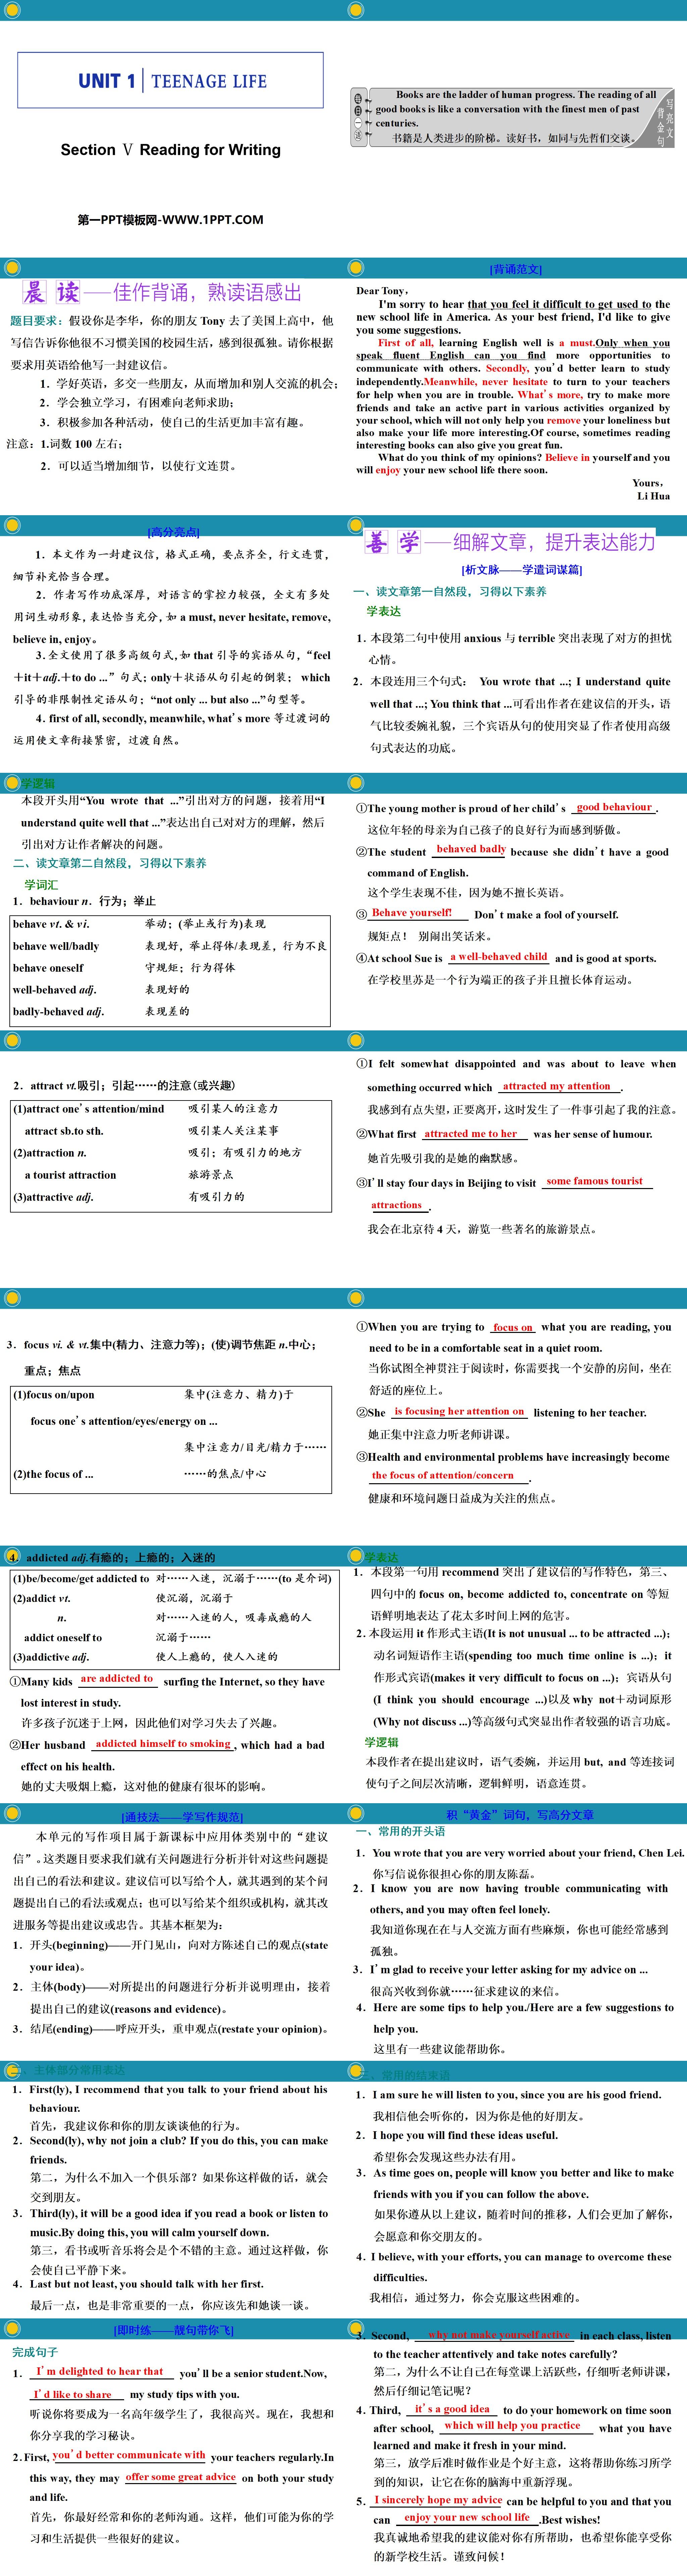 《Teenage Life》Reading for Writing PPT课件
（2）